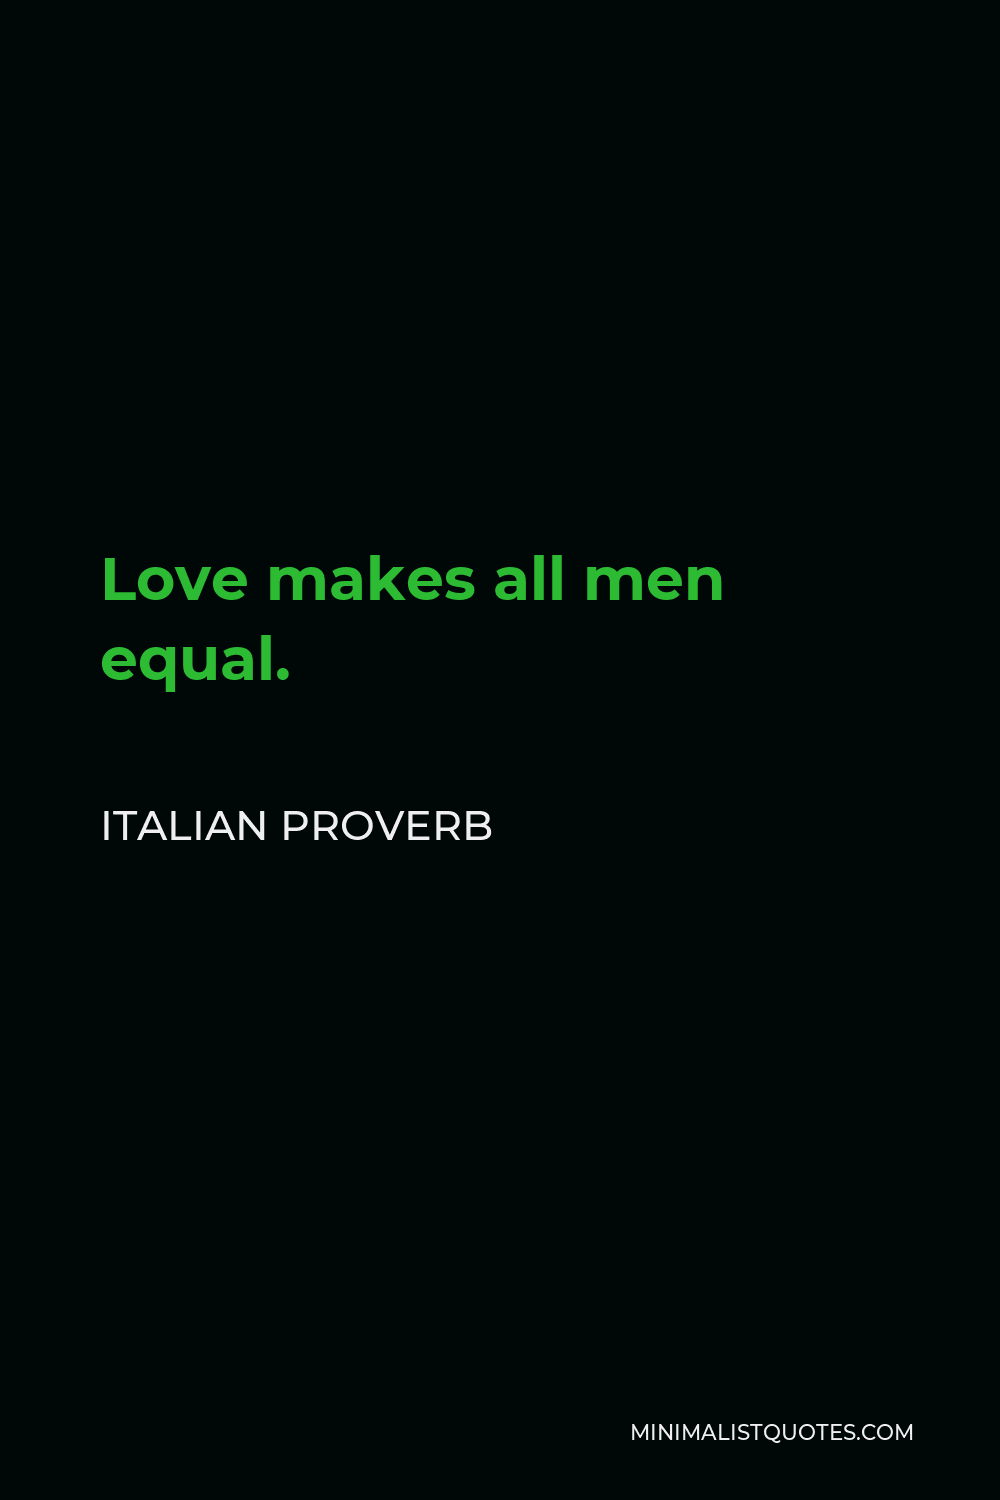 Italian Proverb Quote - Love makes all men equal.